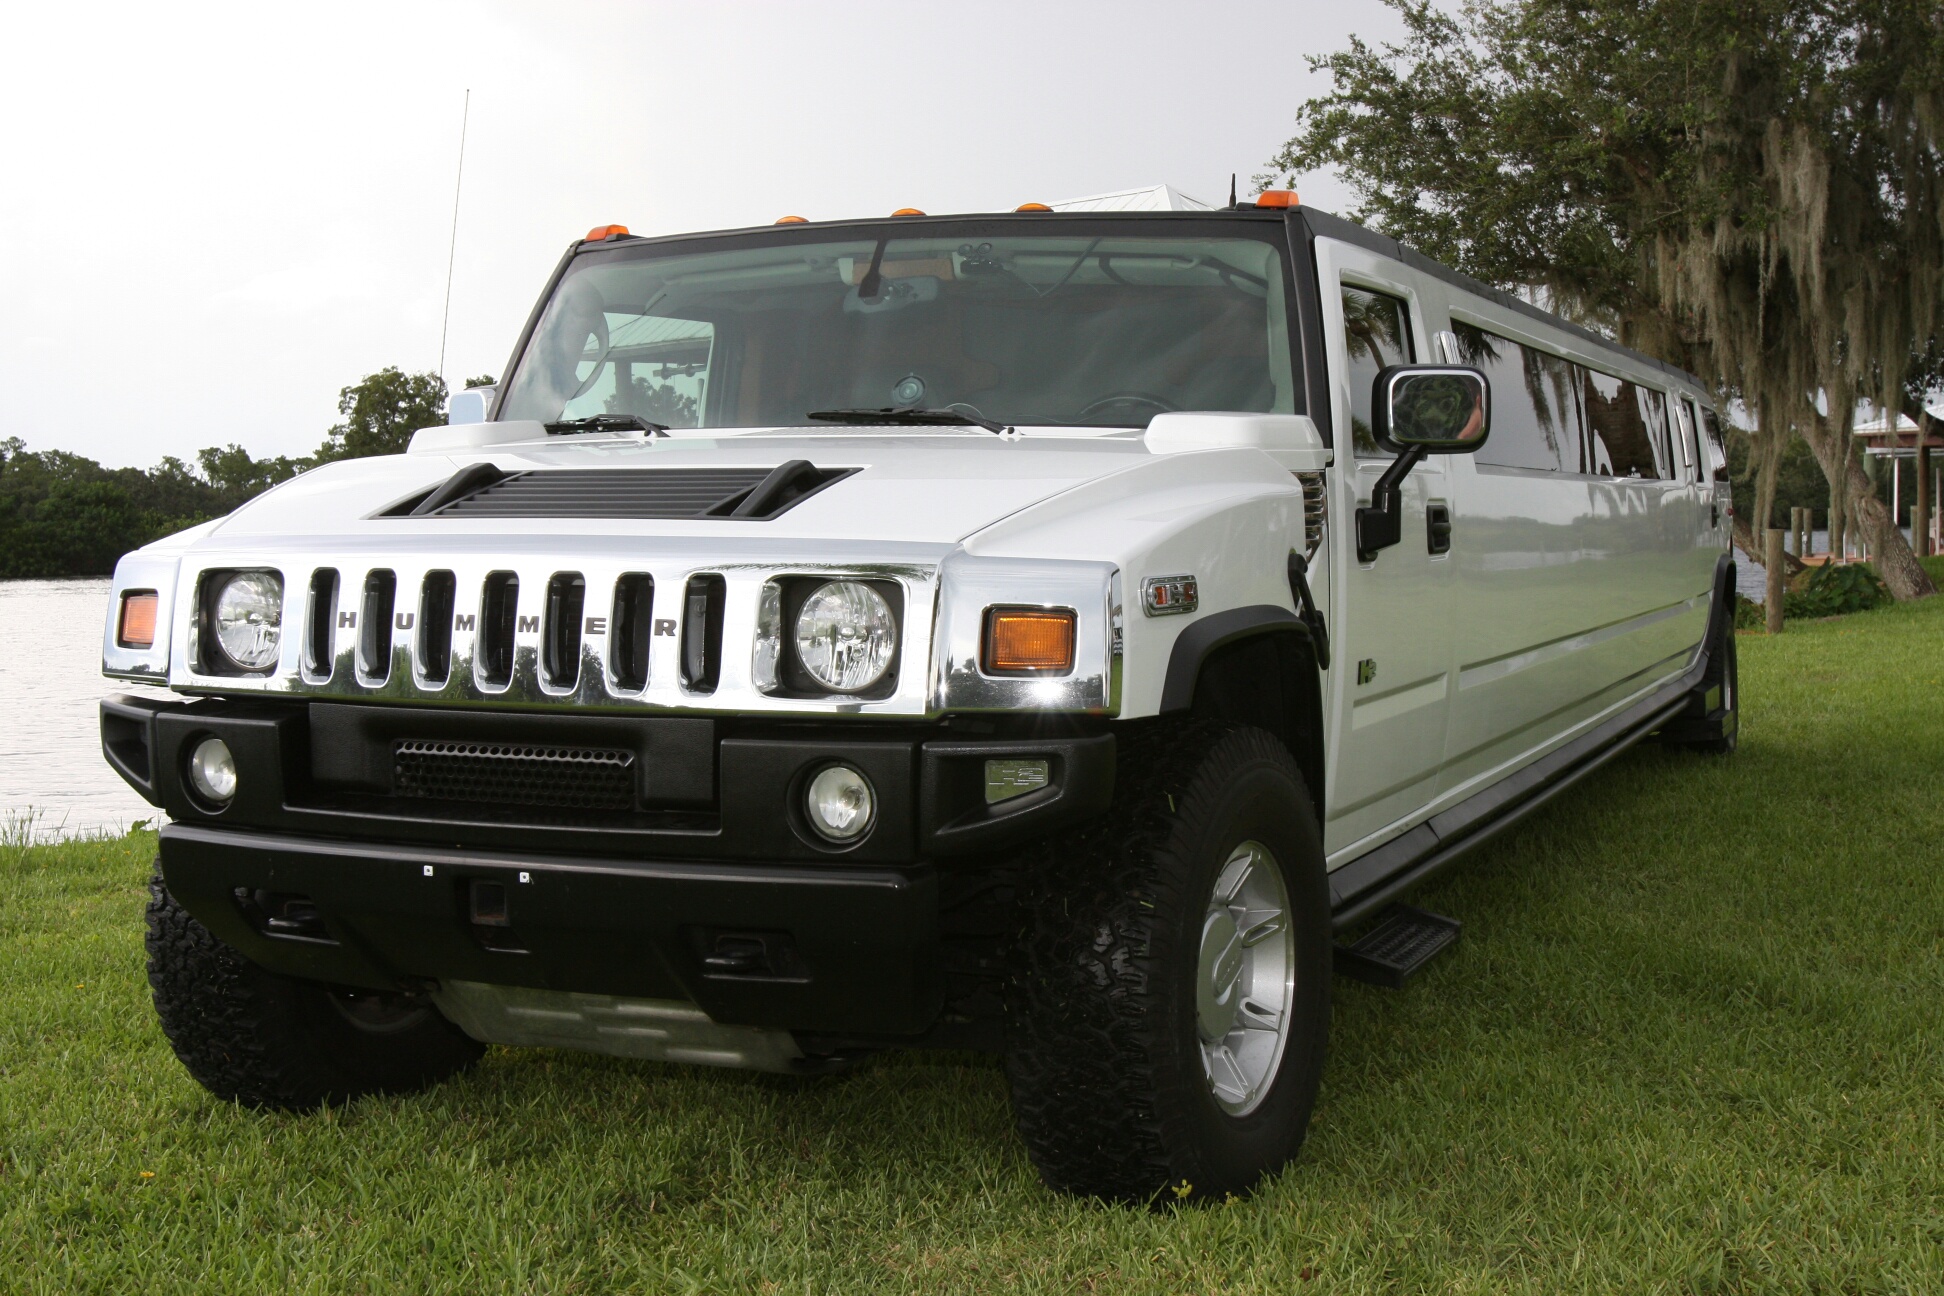 Haines City White Hummer Limo 